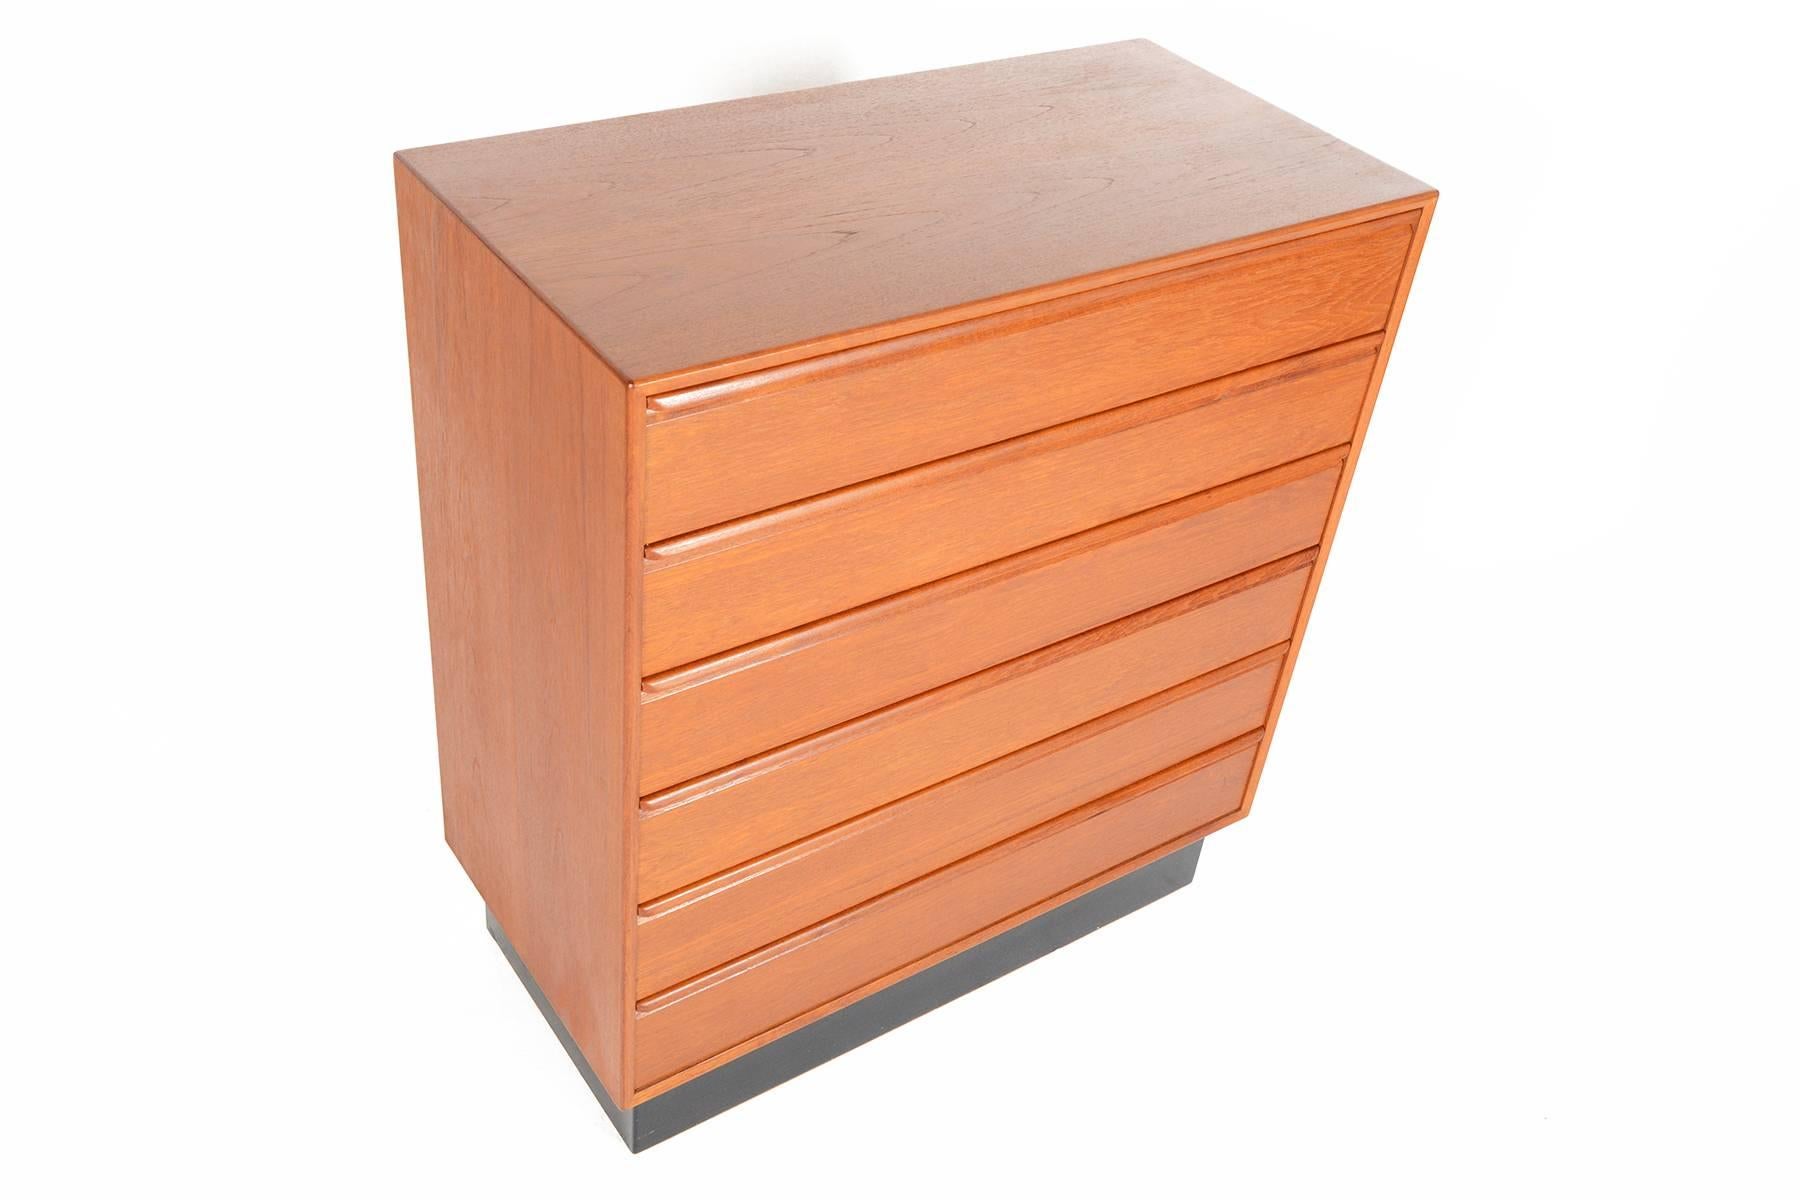 This handsome Norwegian modern teak dresser by Westnofa offers ample storage with its six deep drawers and wide construction. Crafted from solid wood, drawers are cased in mahogany to mark its superior quality. Carved drawer pulls above each drawer